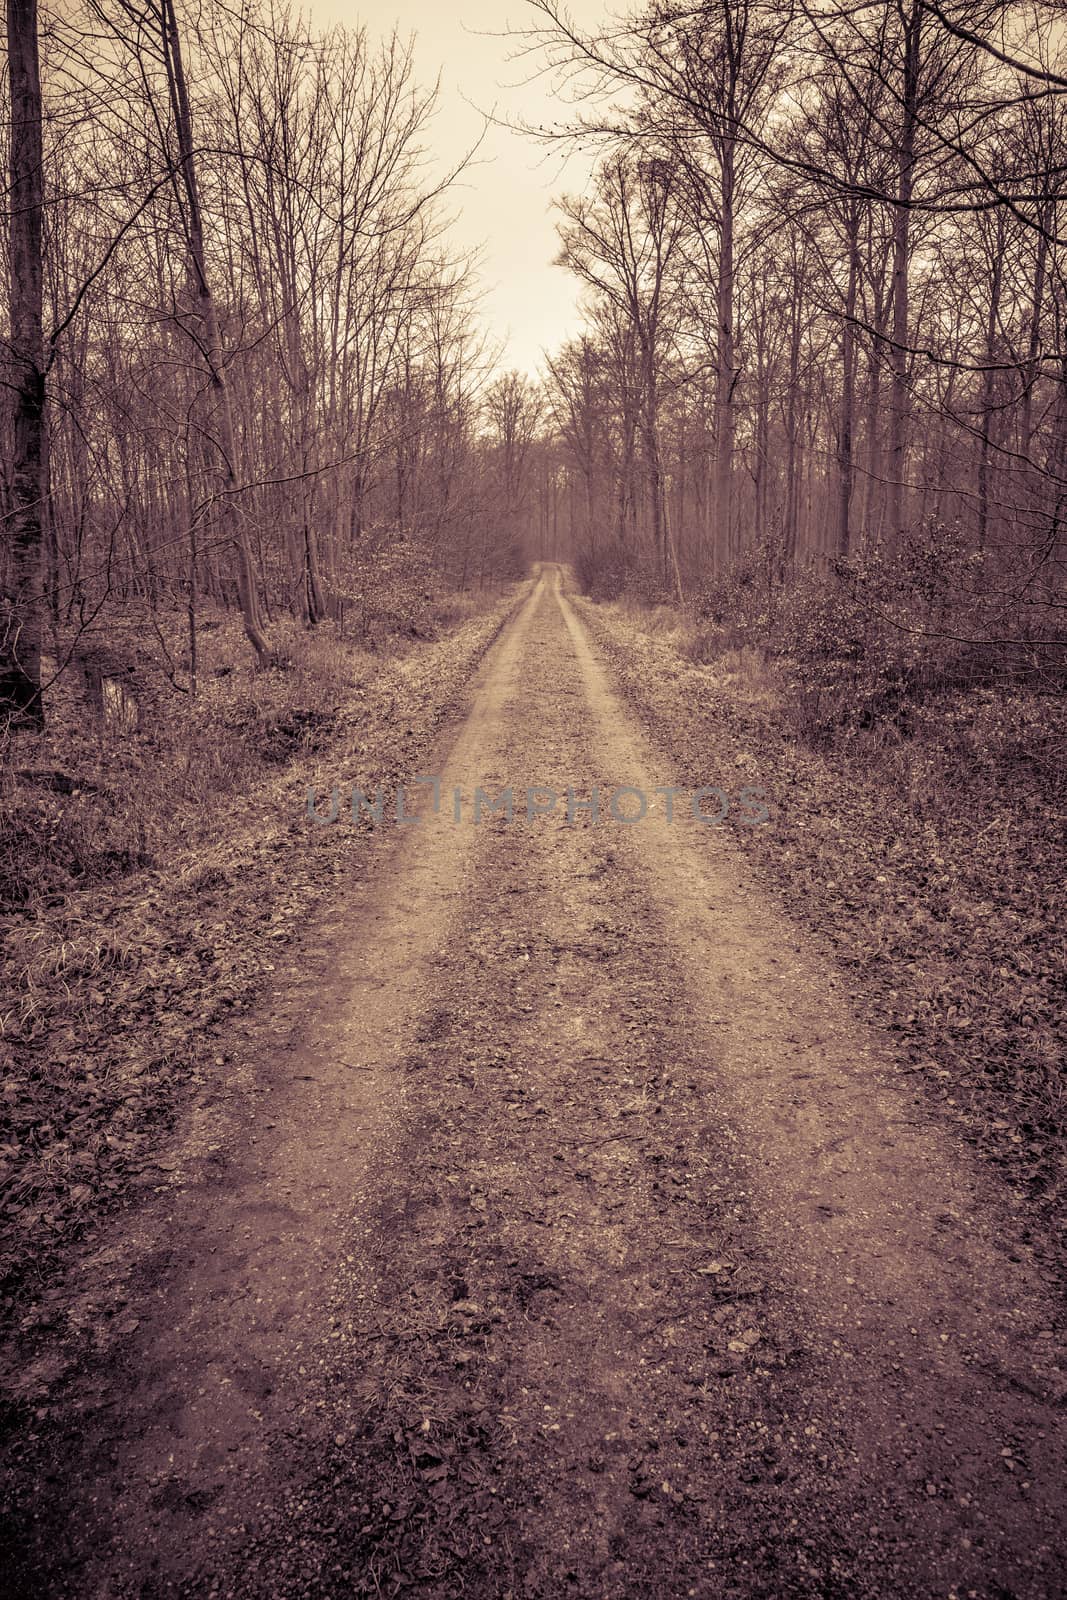 Road in a forest by Sportactive